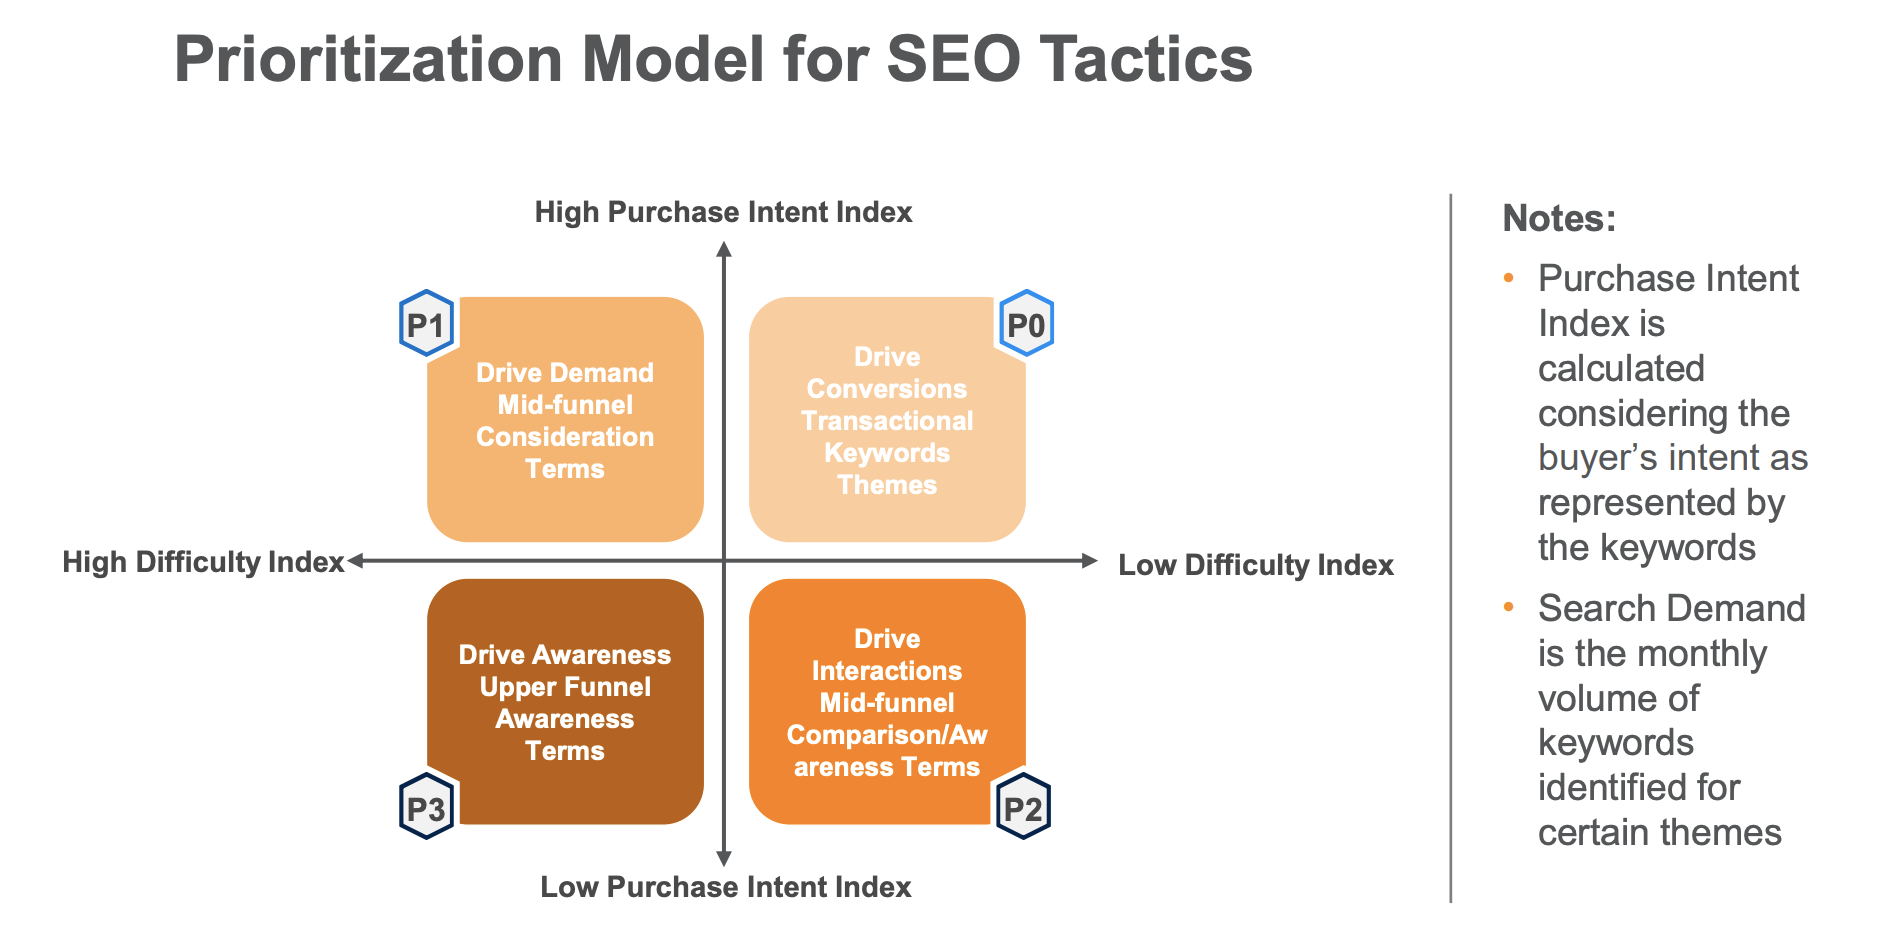 Level Up Your Content Strategy – 5 Steps To SEO Success